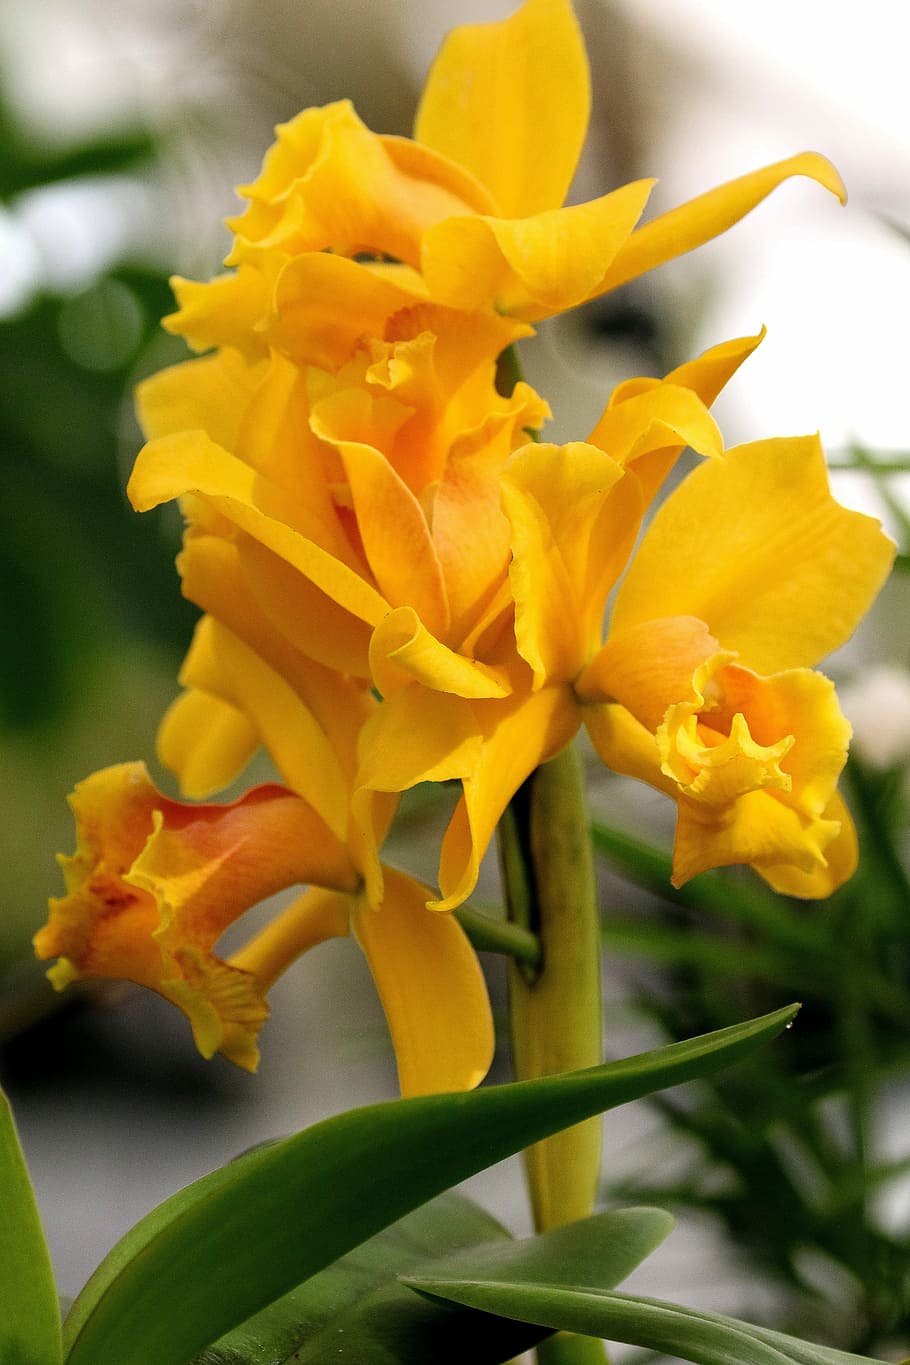 Orchid, Yellow, Flower, Floral, Botany, plant, nature, botanical, green, new jersey